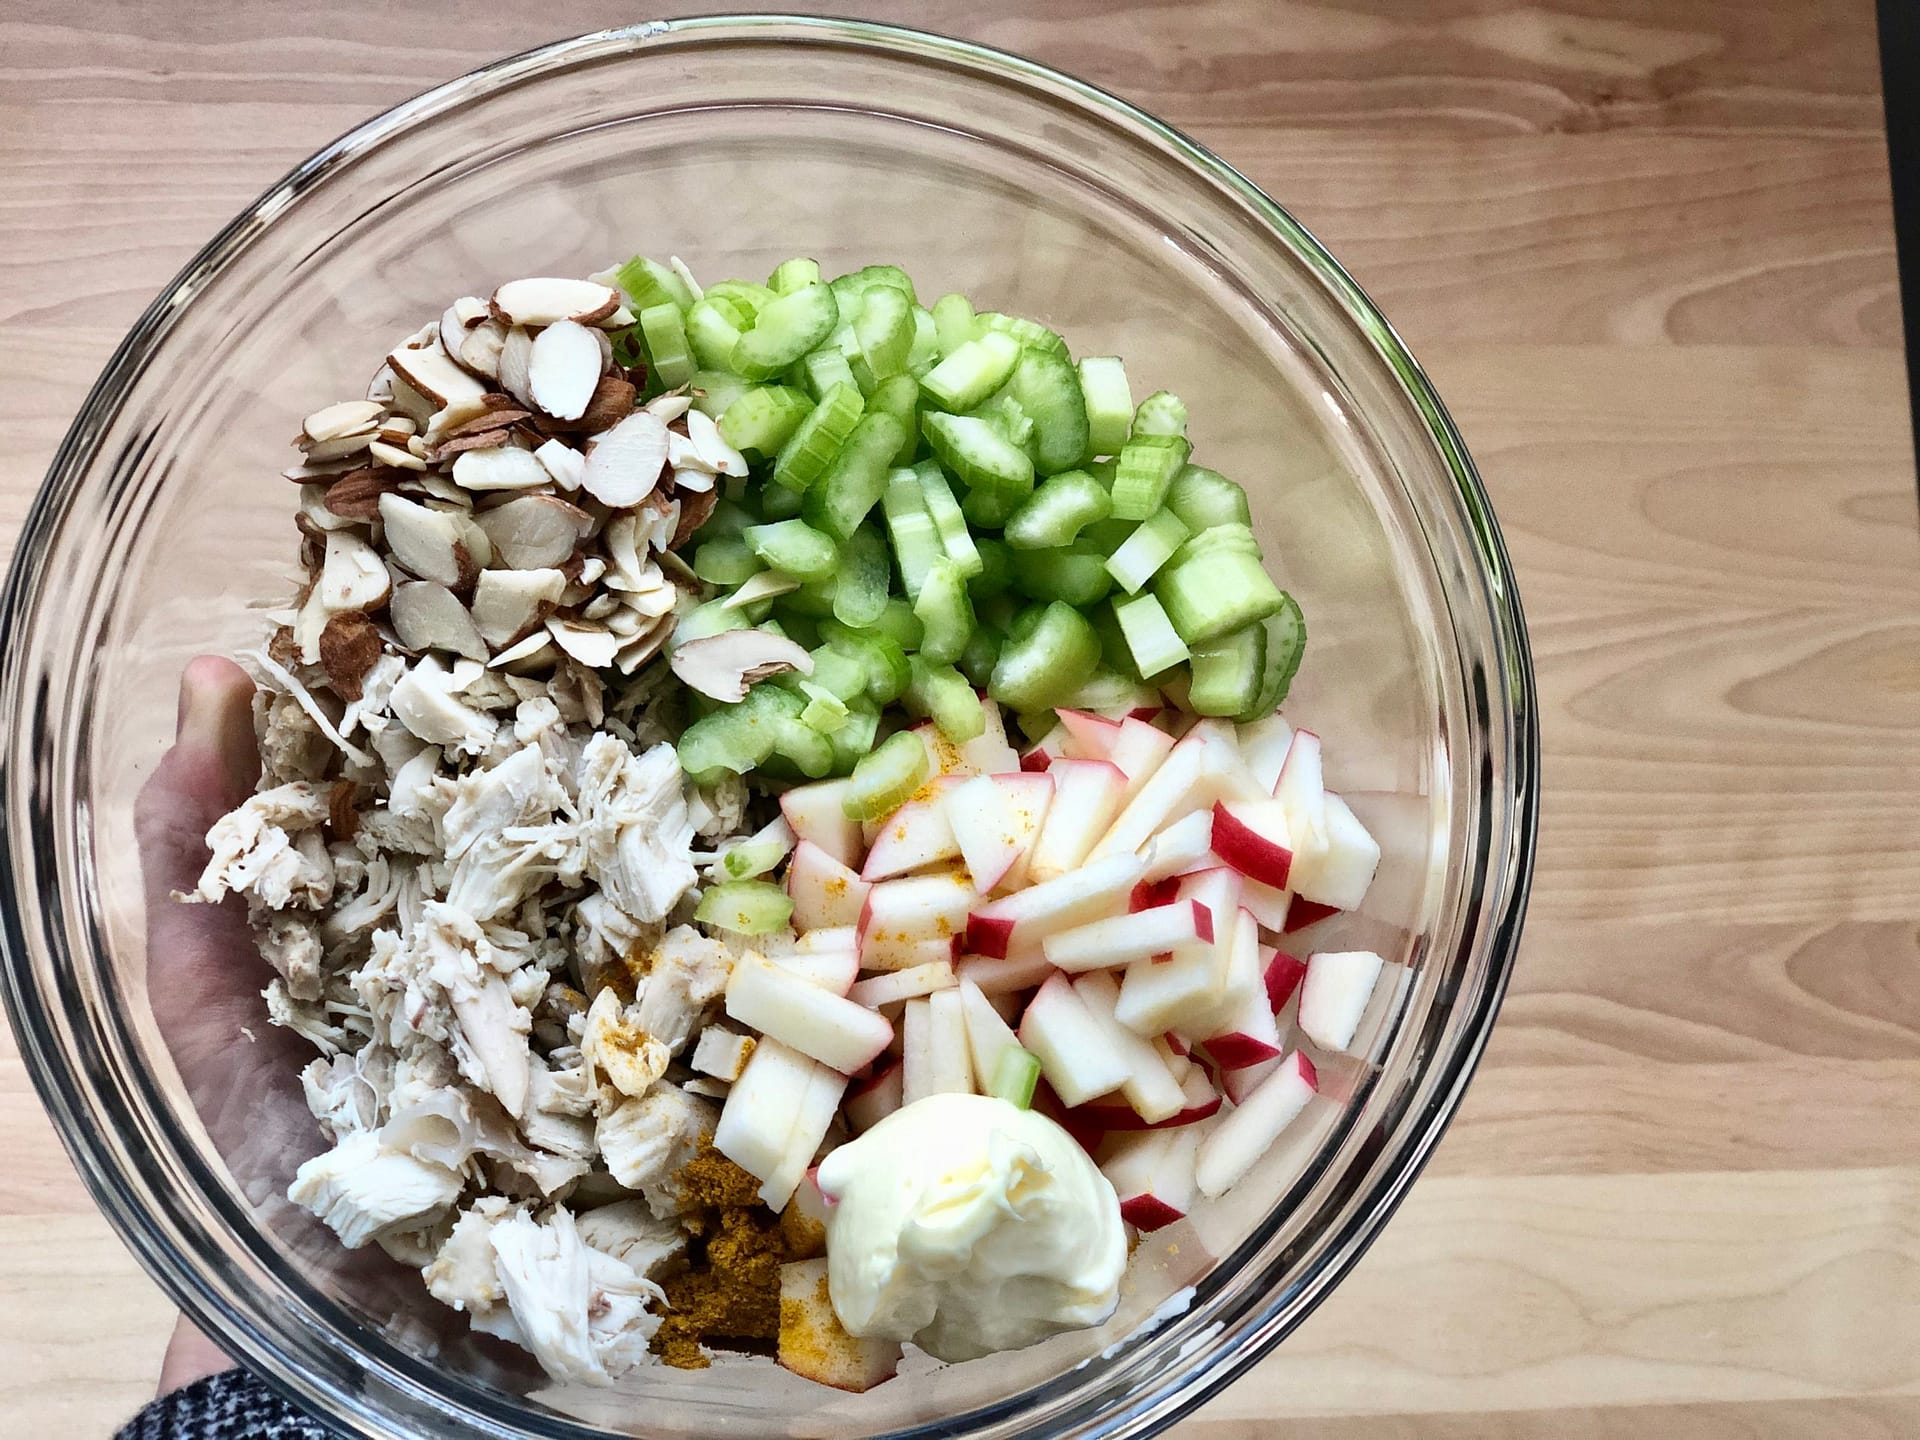 Curry Chicken Salad - Cooking Made Healthy